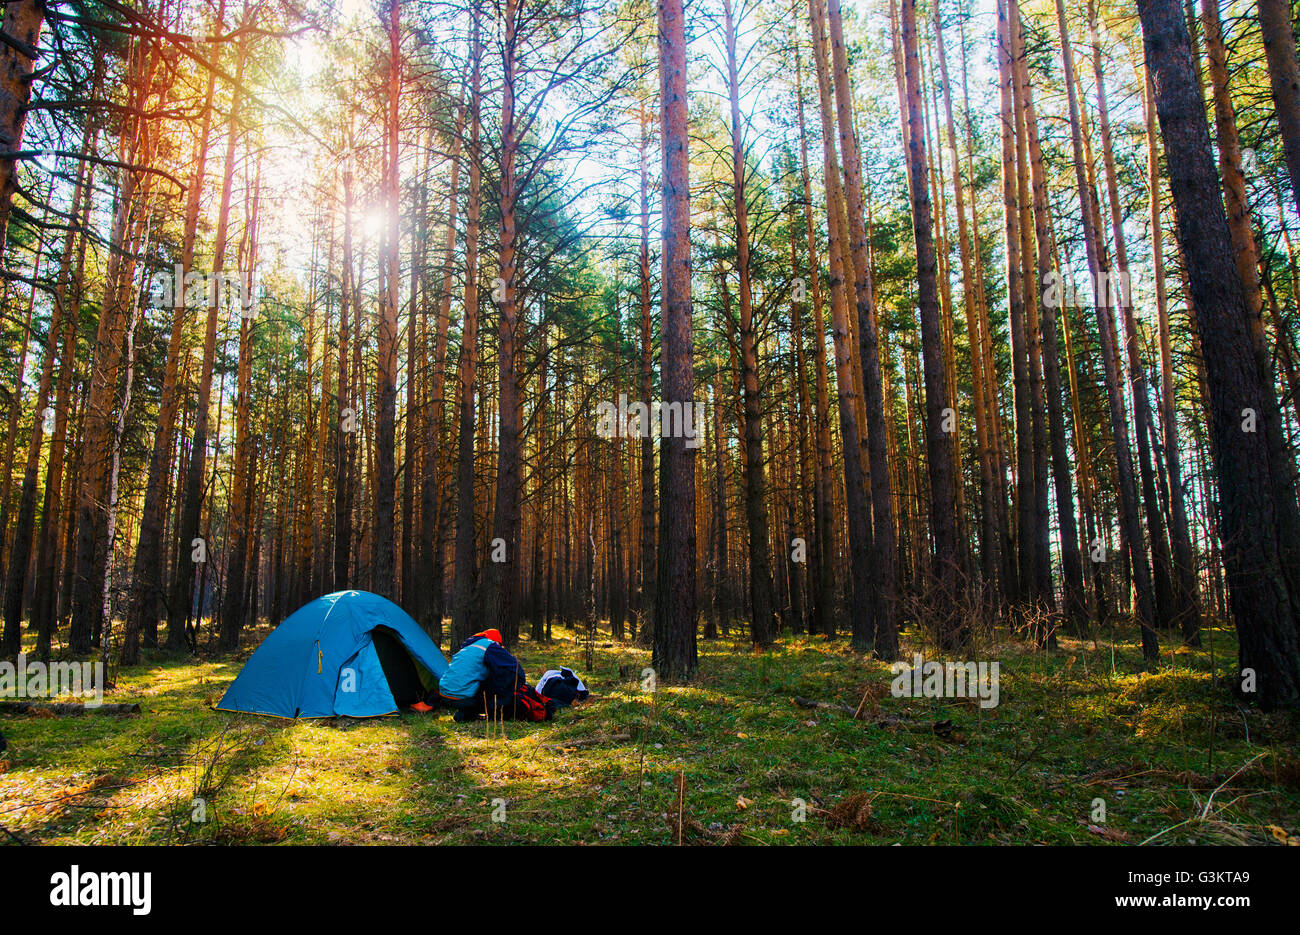 Woman by tent pitched in forest Stock Photo